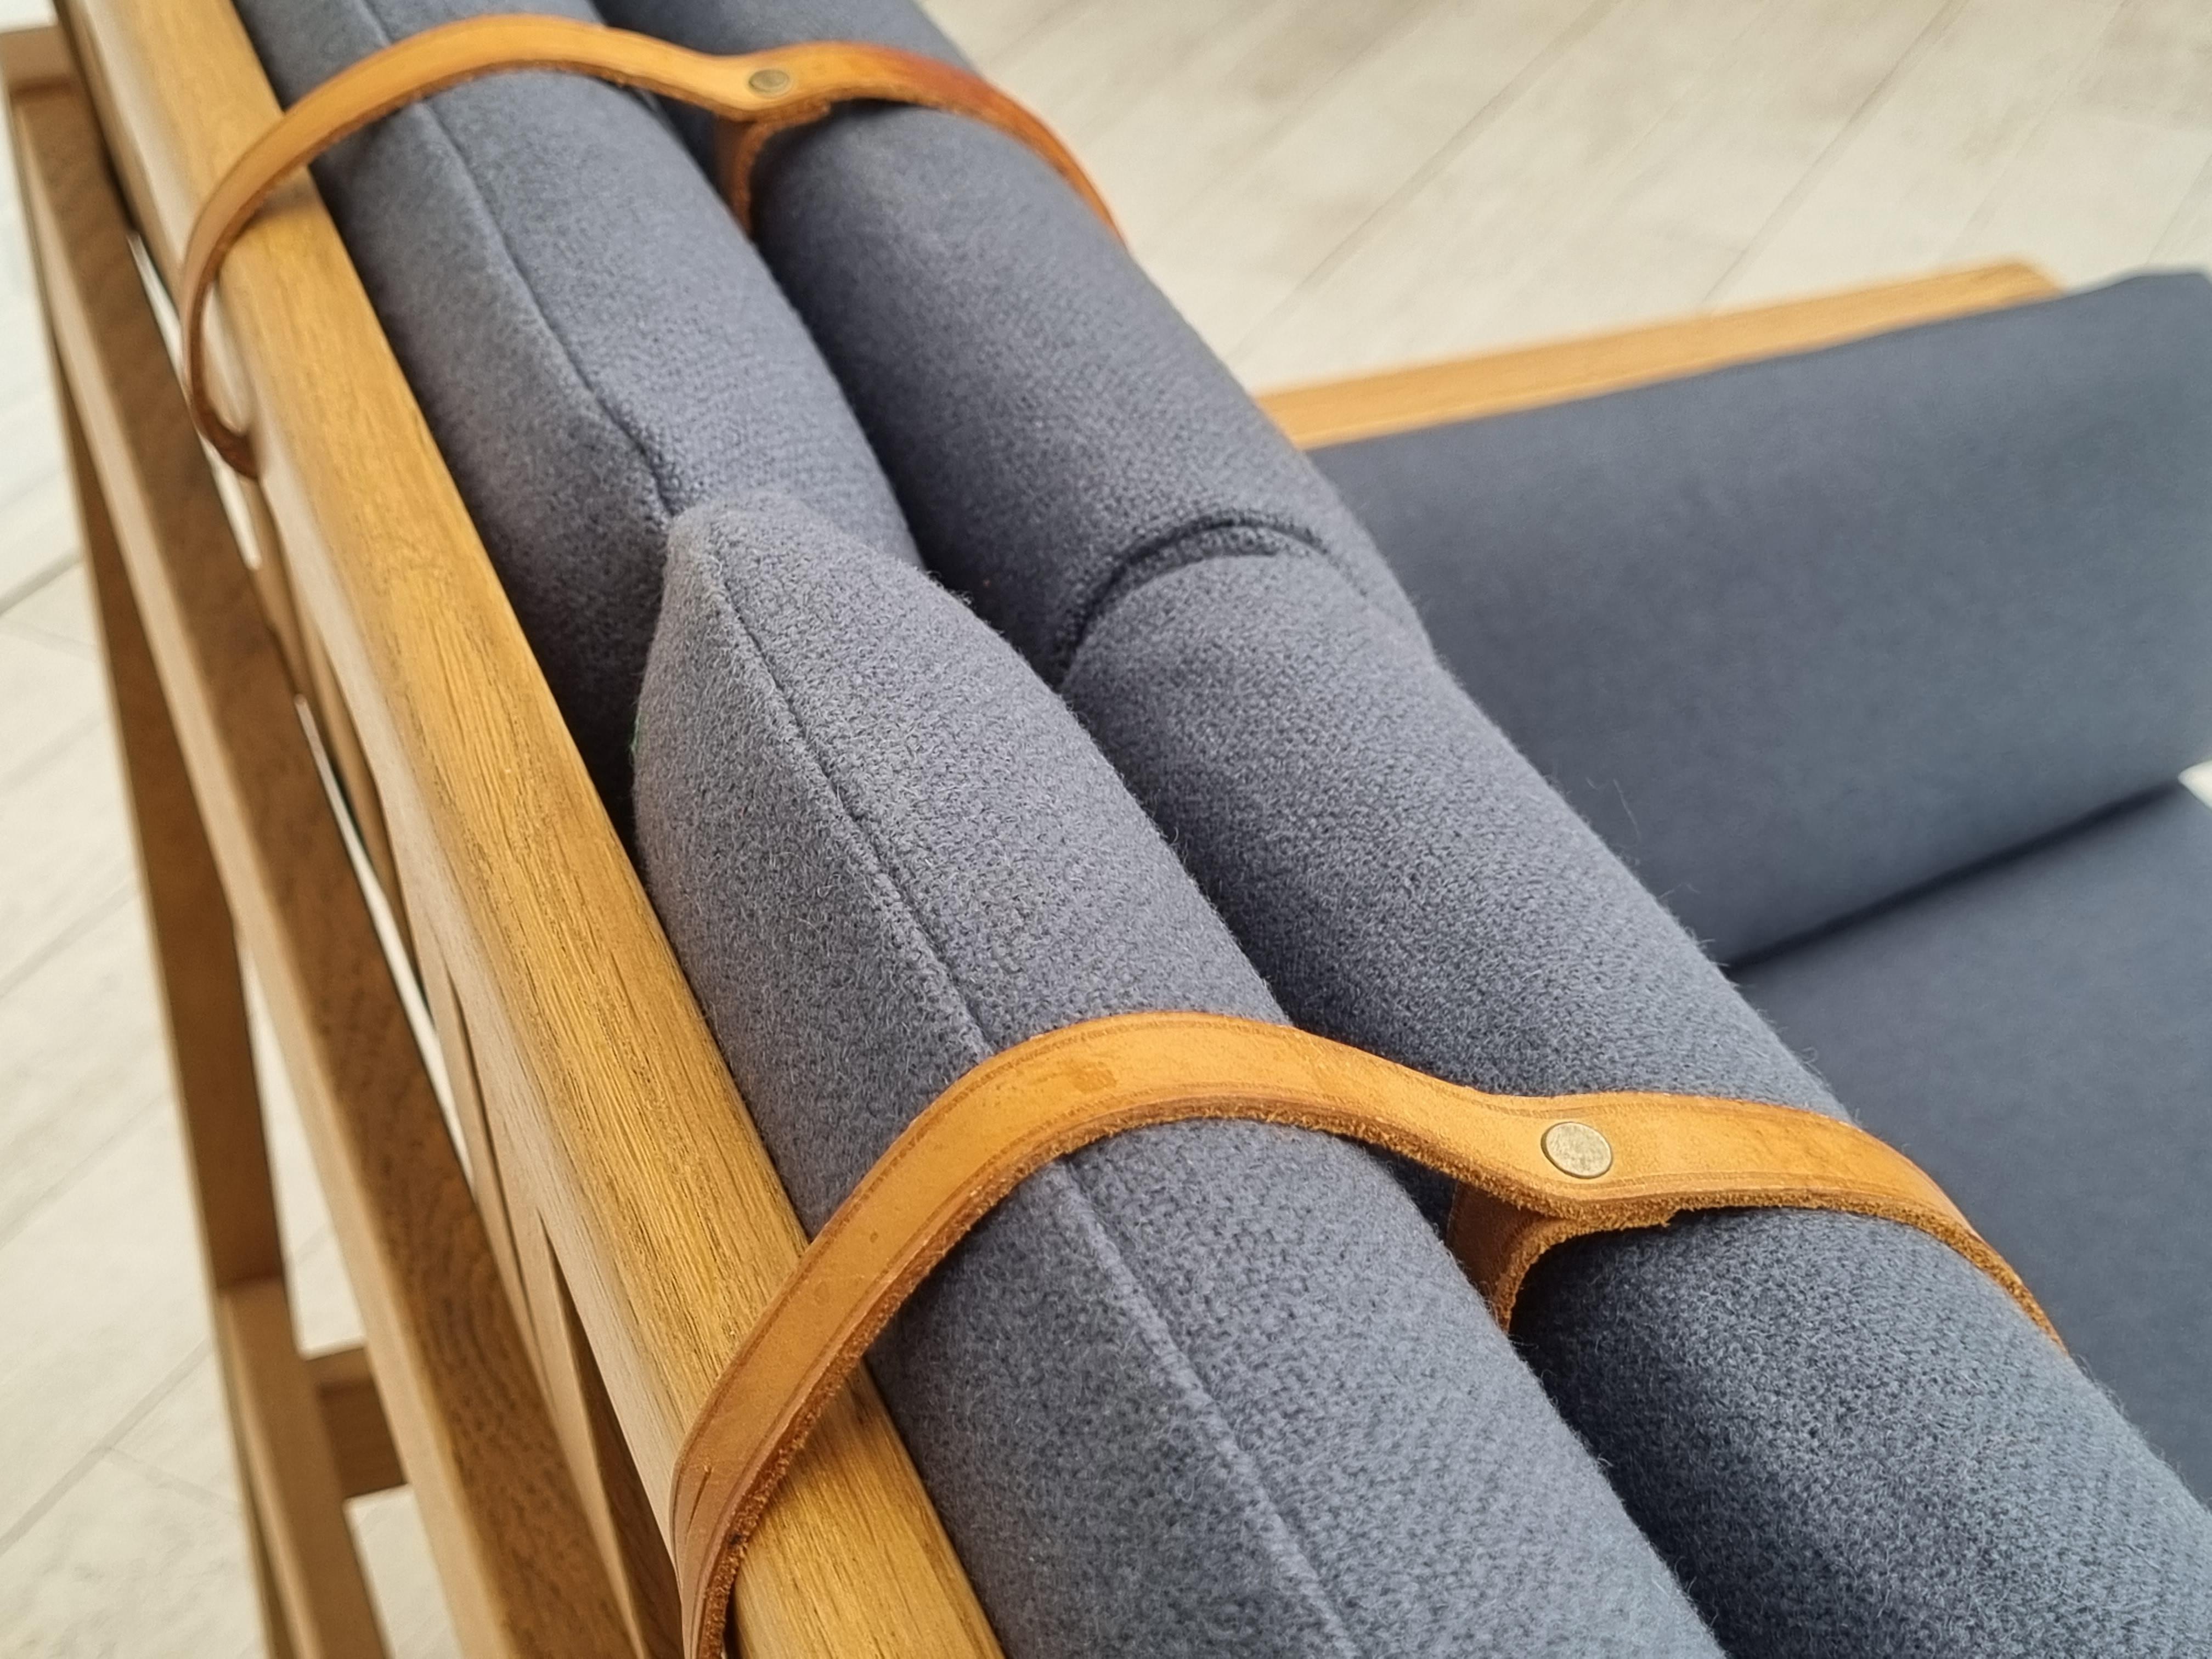 70s, Danish design by Børge Mogensen, completely renovated 2-person sofa, model 2252. Brand new cushions and elastic bottom in the sofa. Quality gray furniture wool fabric. Original leather strips. Renovated right after original design. Refreshed